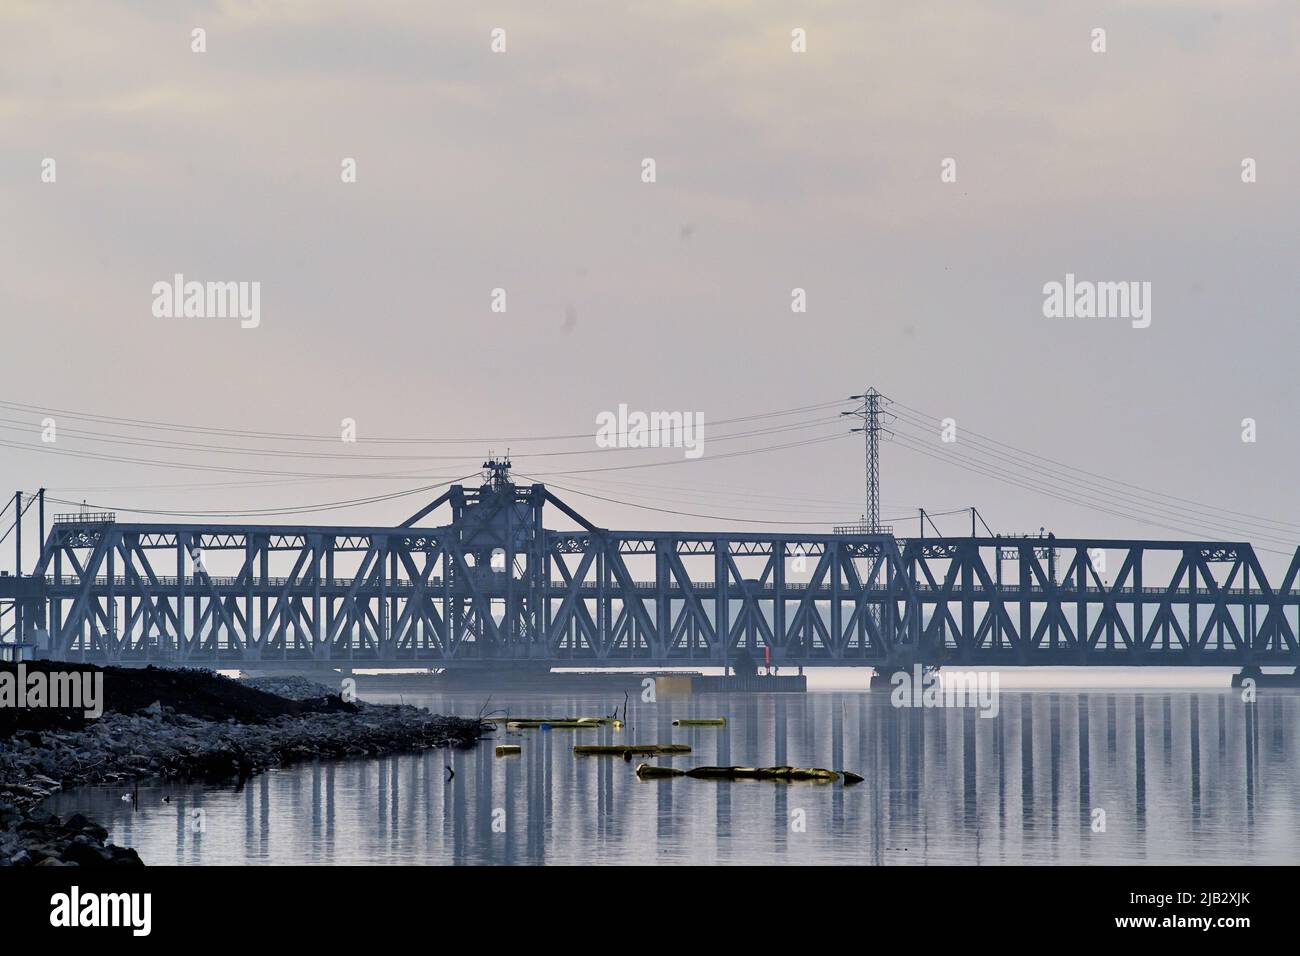 Fort Madison, Iowa, USA. The BNSF Railway swing bridge spanning the Mississippi River on a very hot, foggy morning. Stock Photo